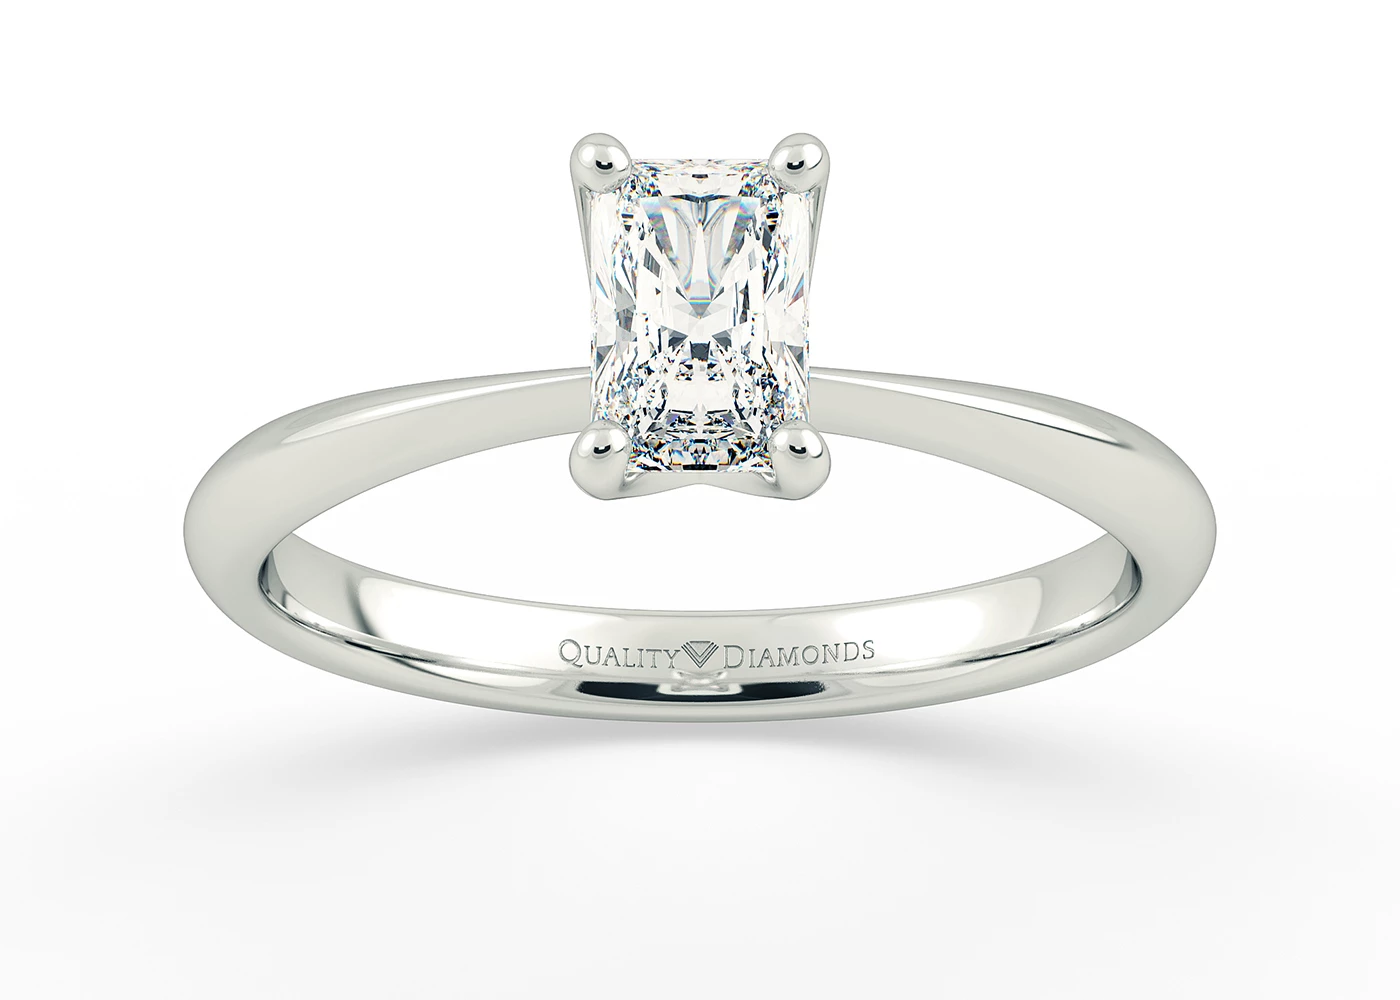 Two Carat Radiant Solitaire Diamond Engagement Ring in 18K White Gold